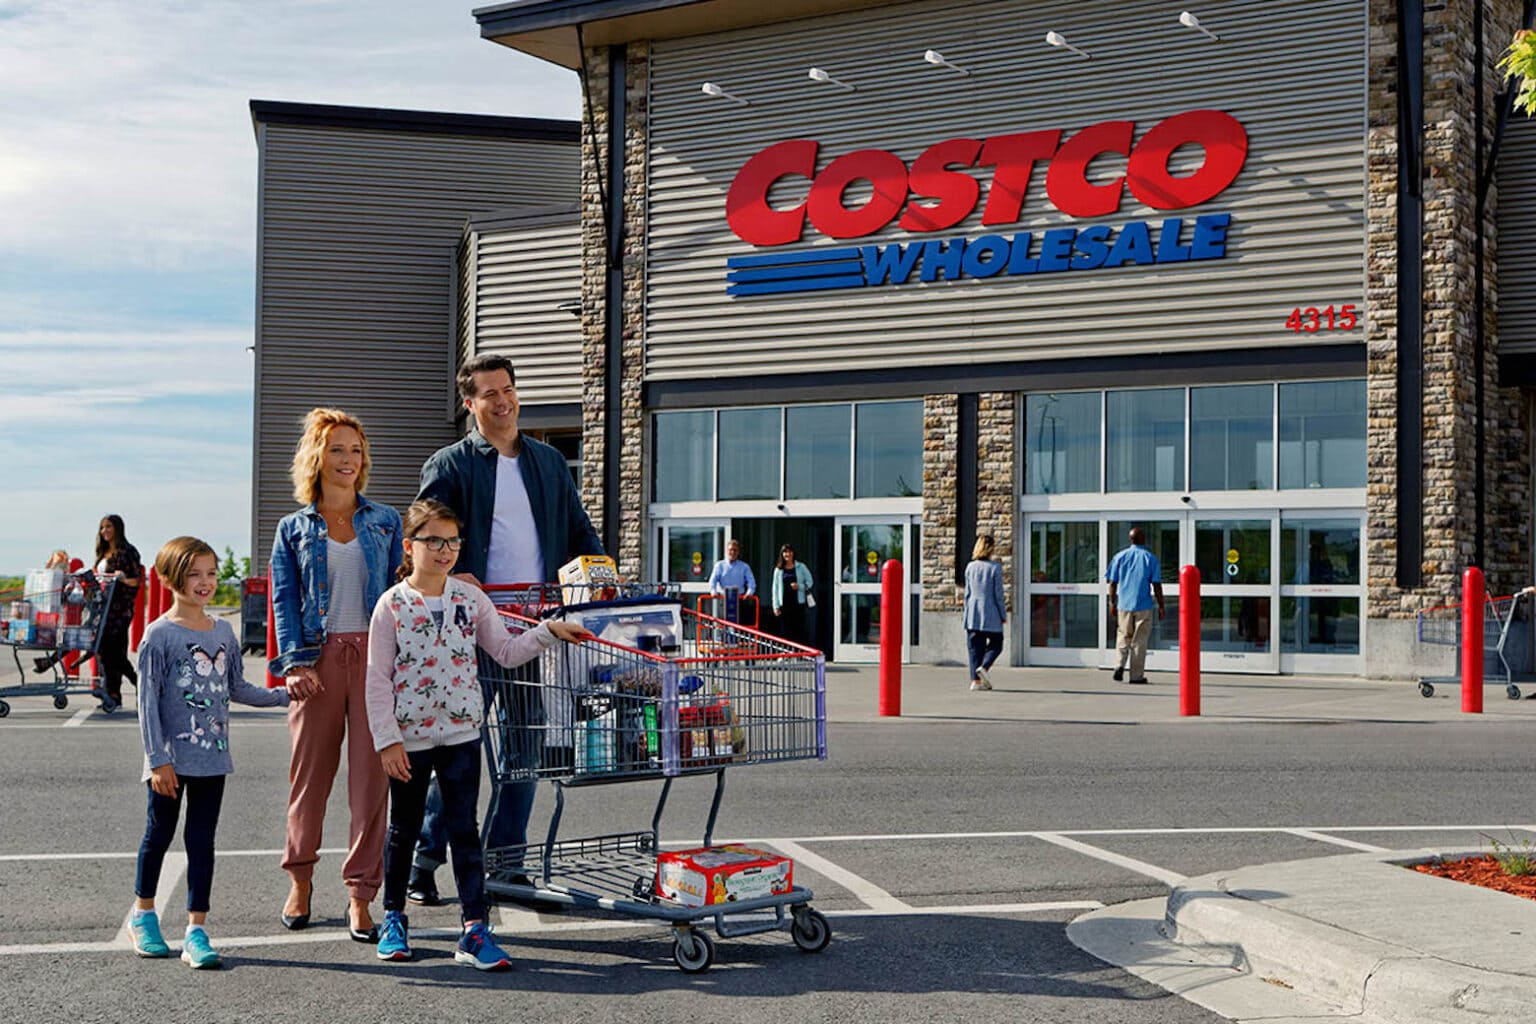 Here's how to shop get a Costco membership plus a $40 Digital Costco Shop Card* for $60.